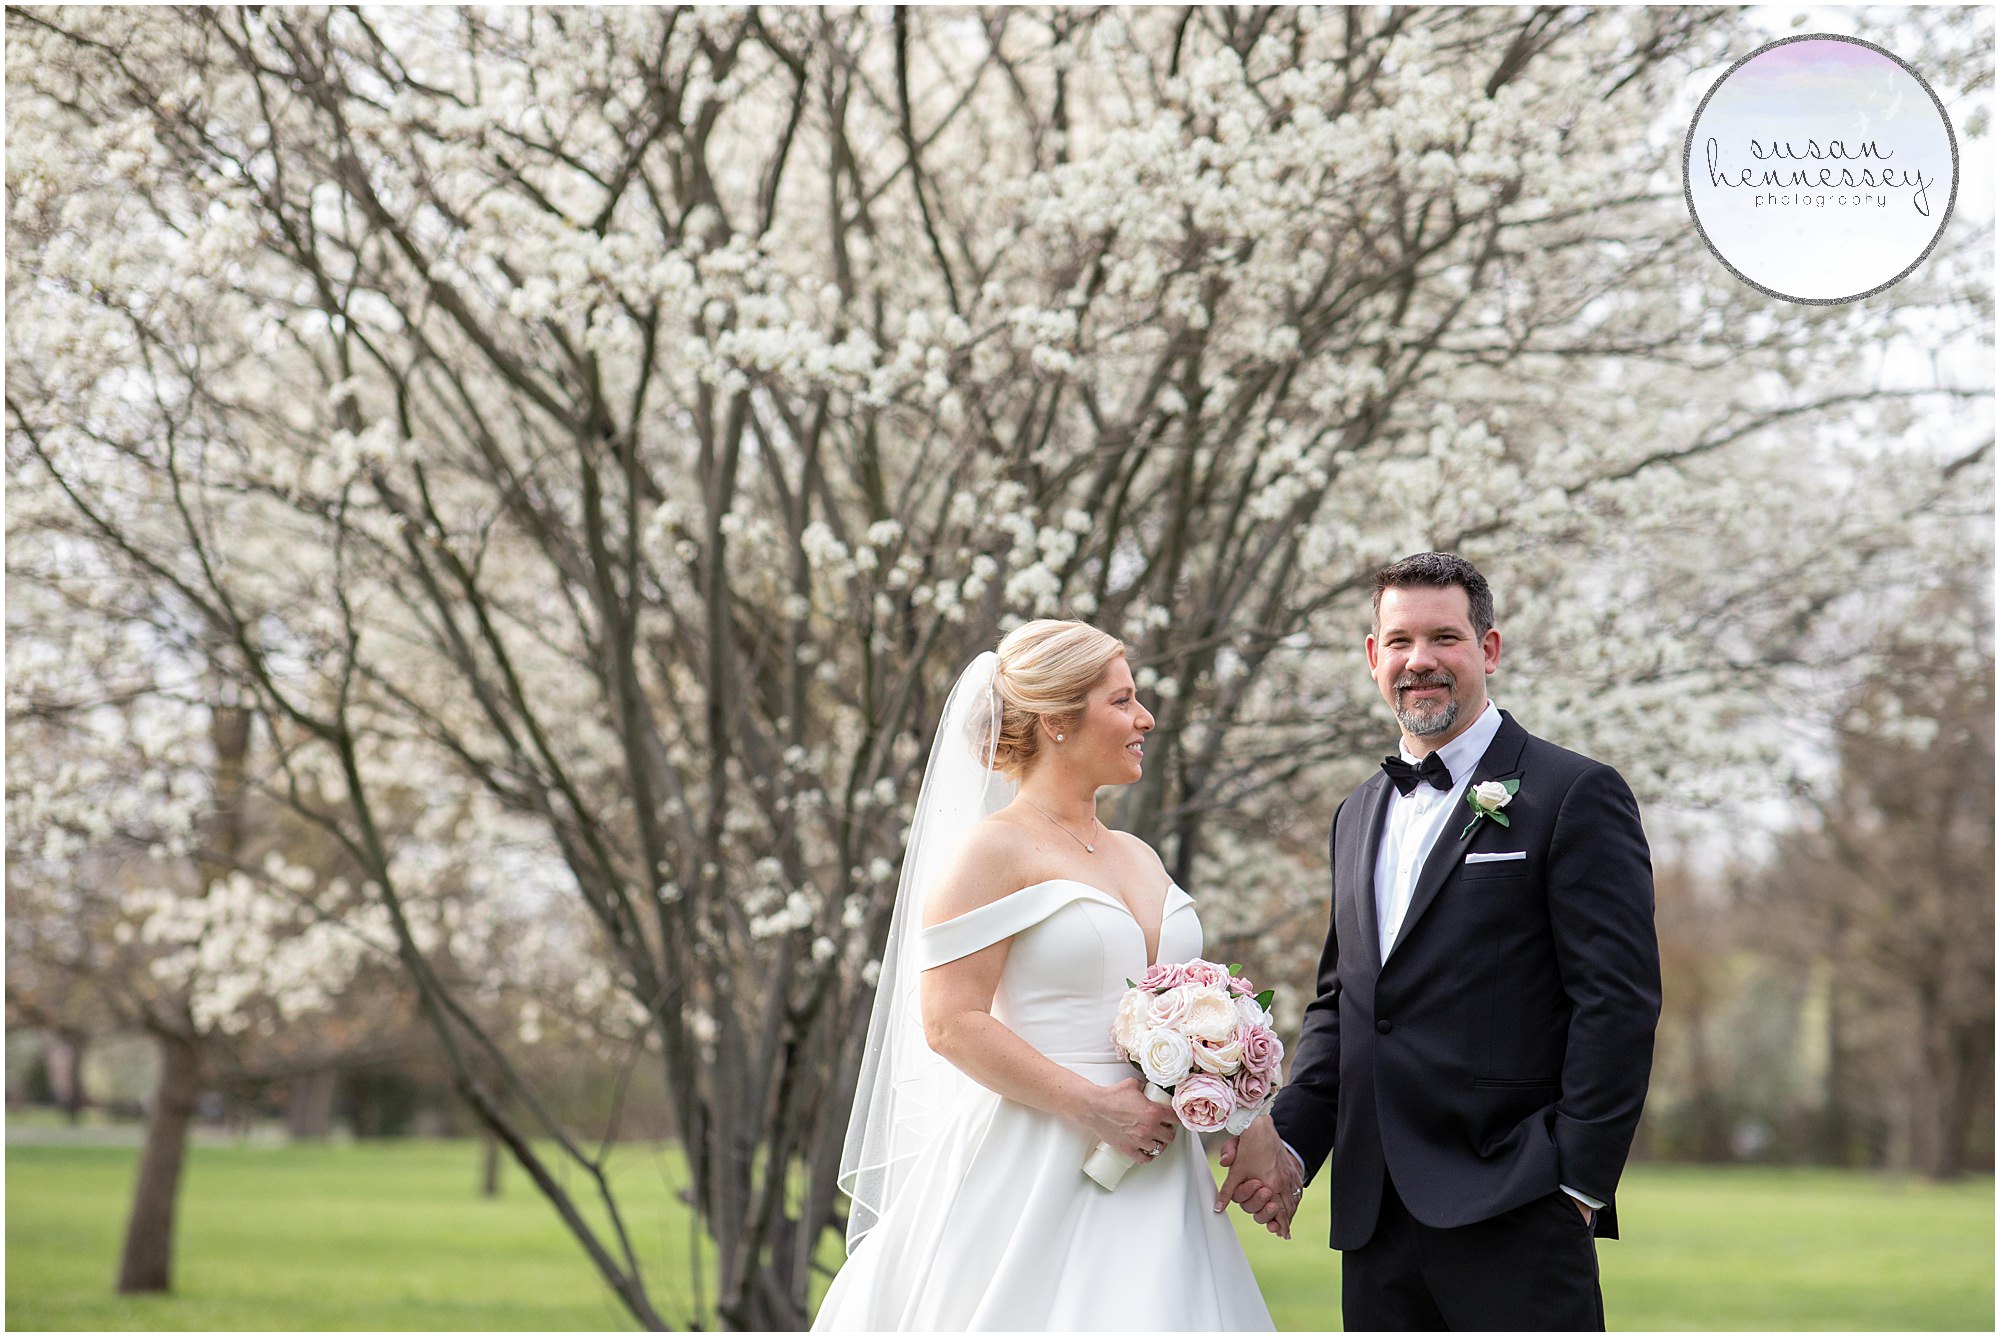 Planning a Micro Wedding? The First Presbyterian Church of Moorestown is stunning in the Spring.